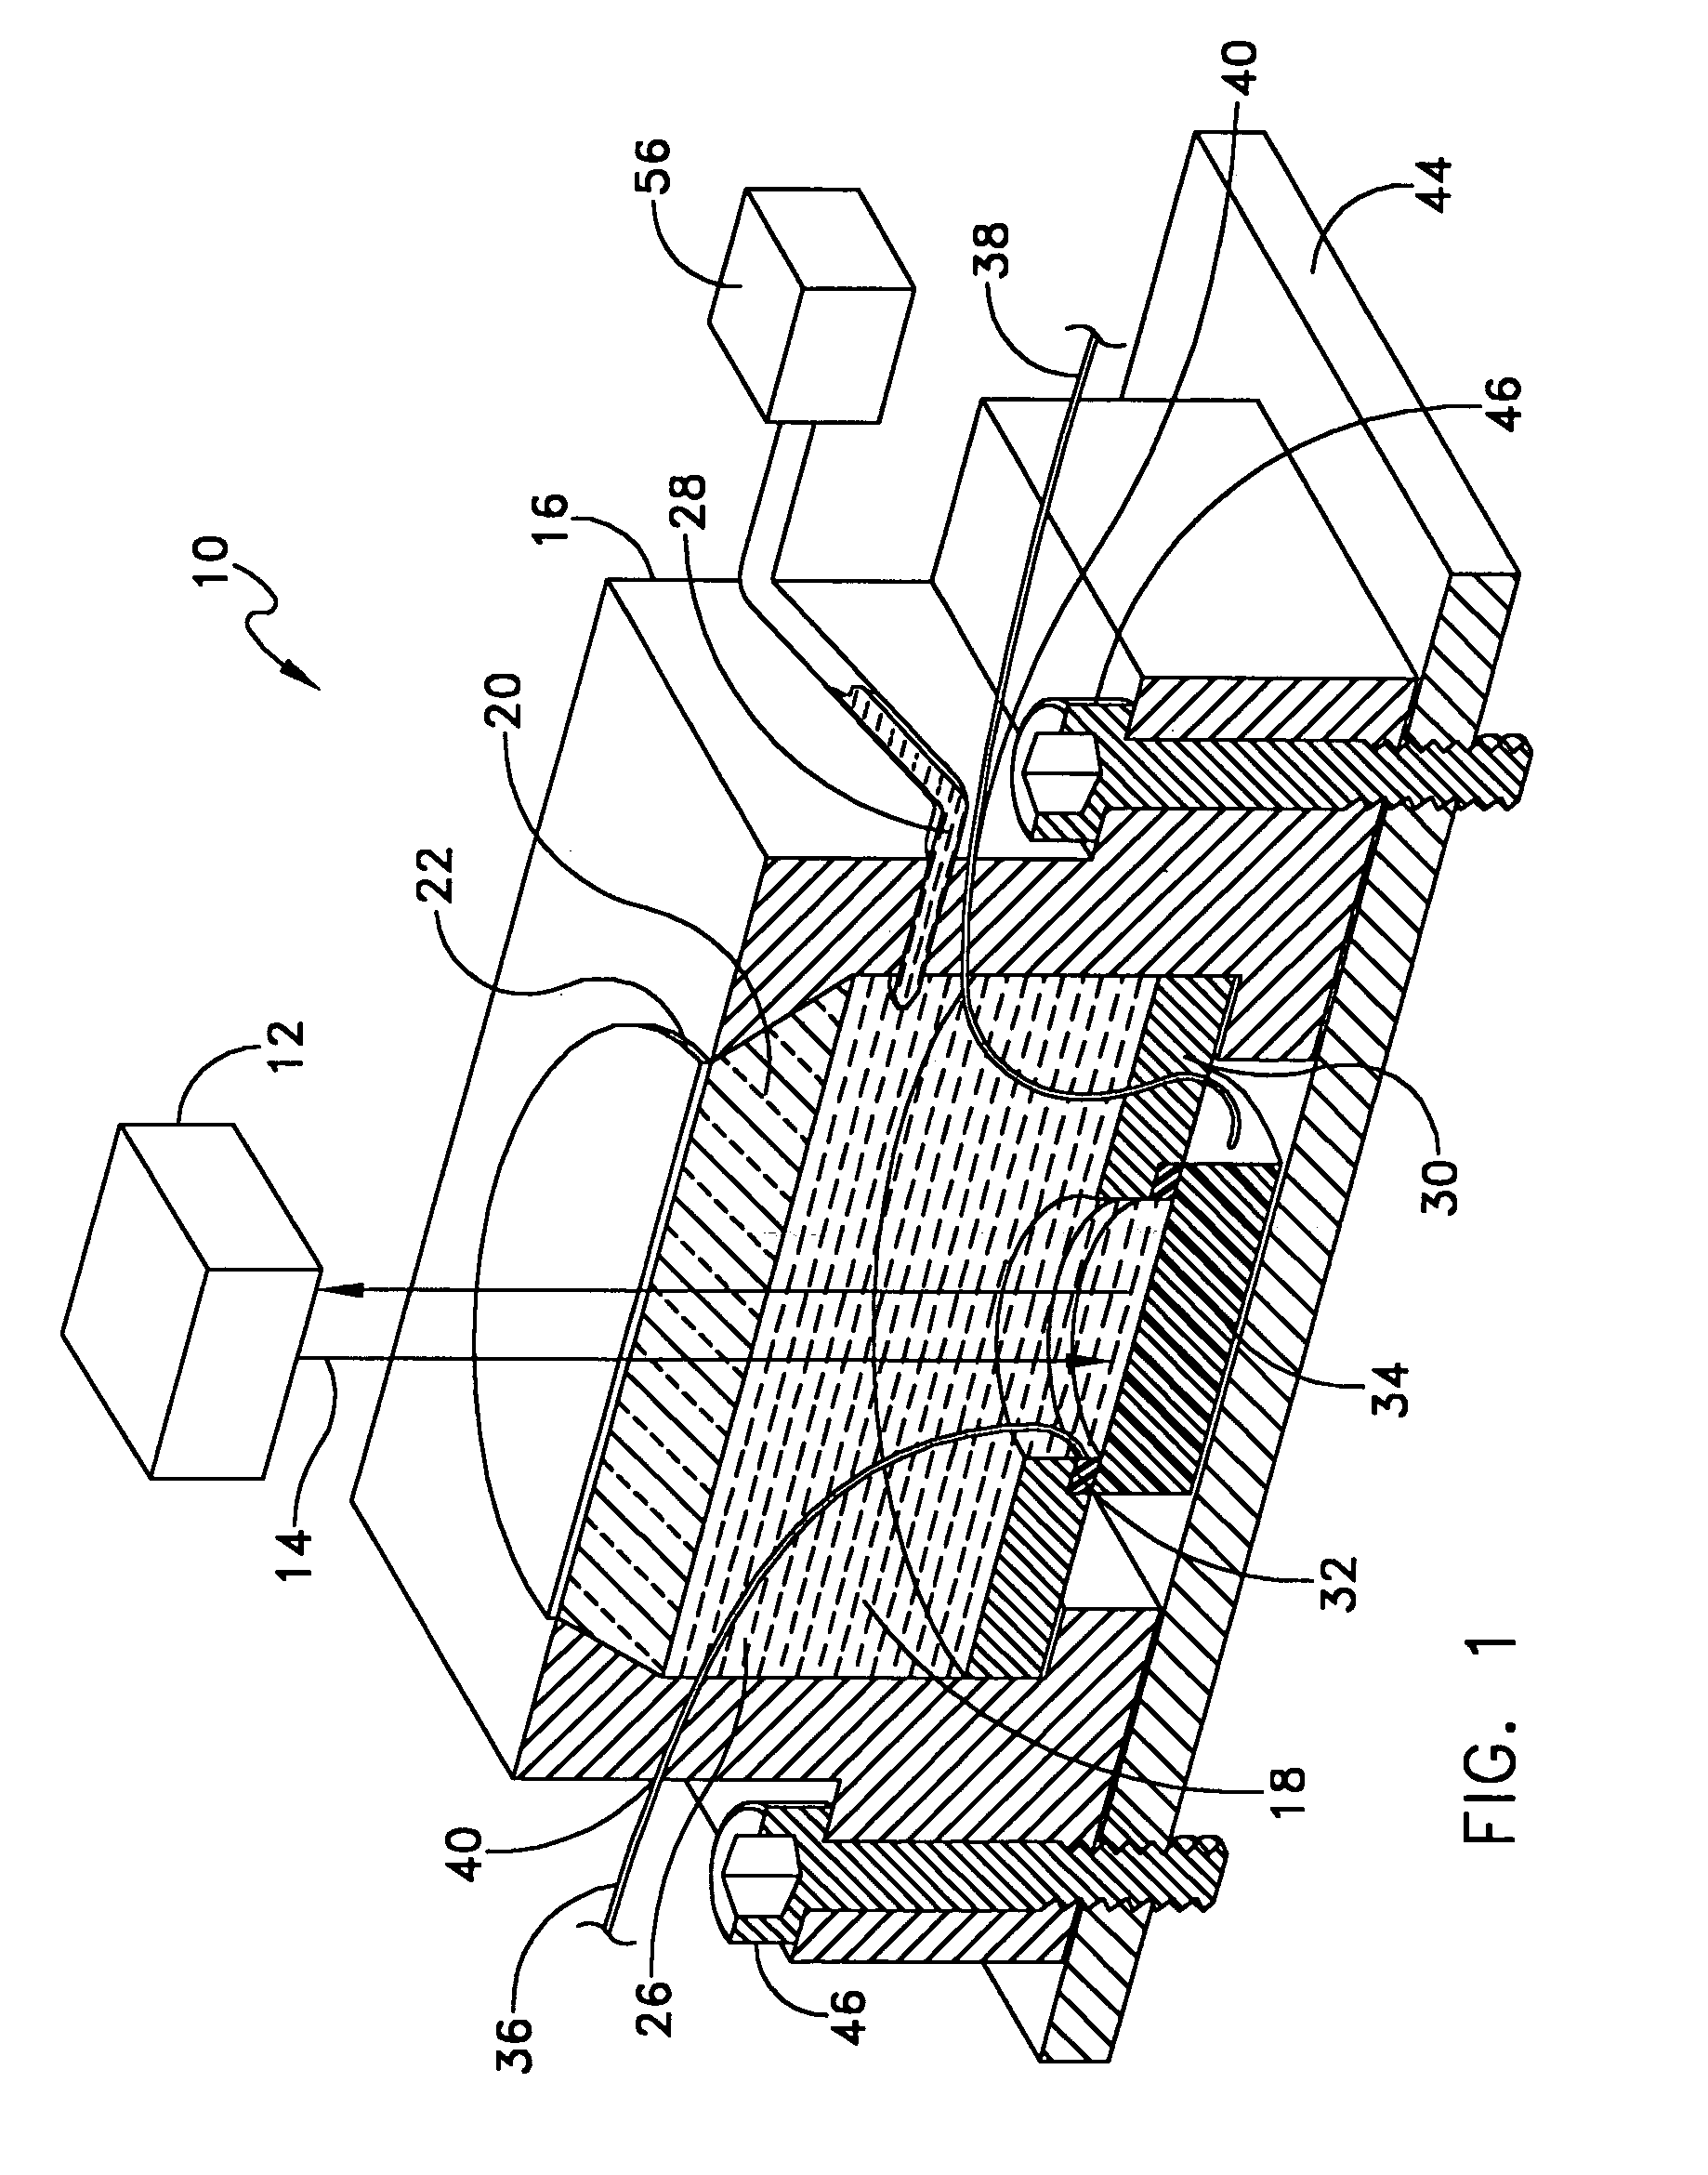 System and apparatus for measuring displacements in electro-active materials